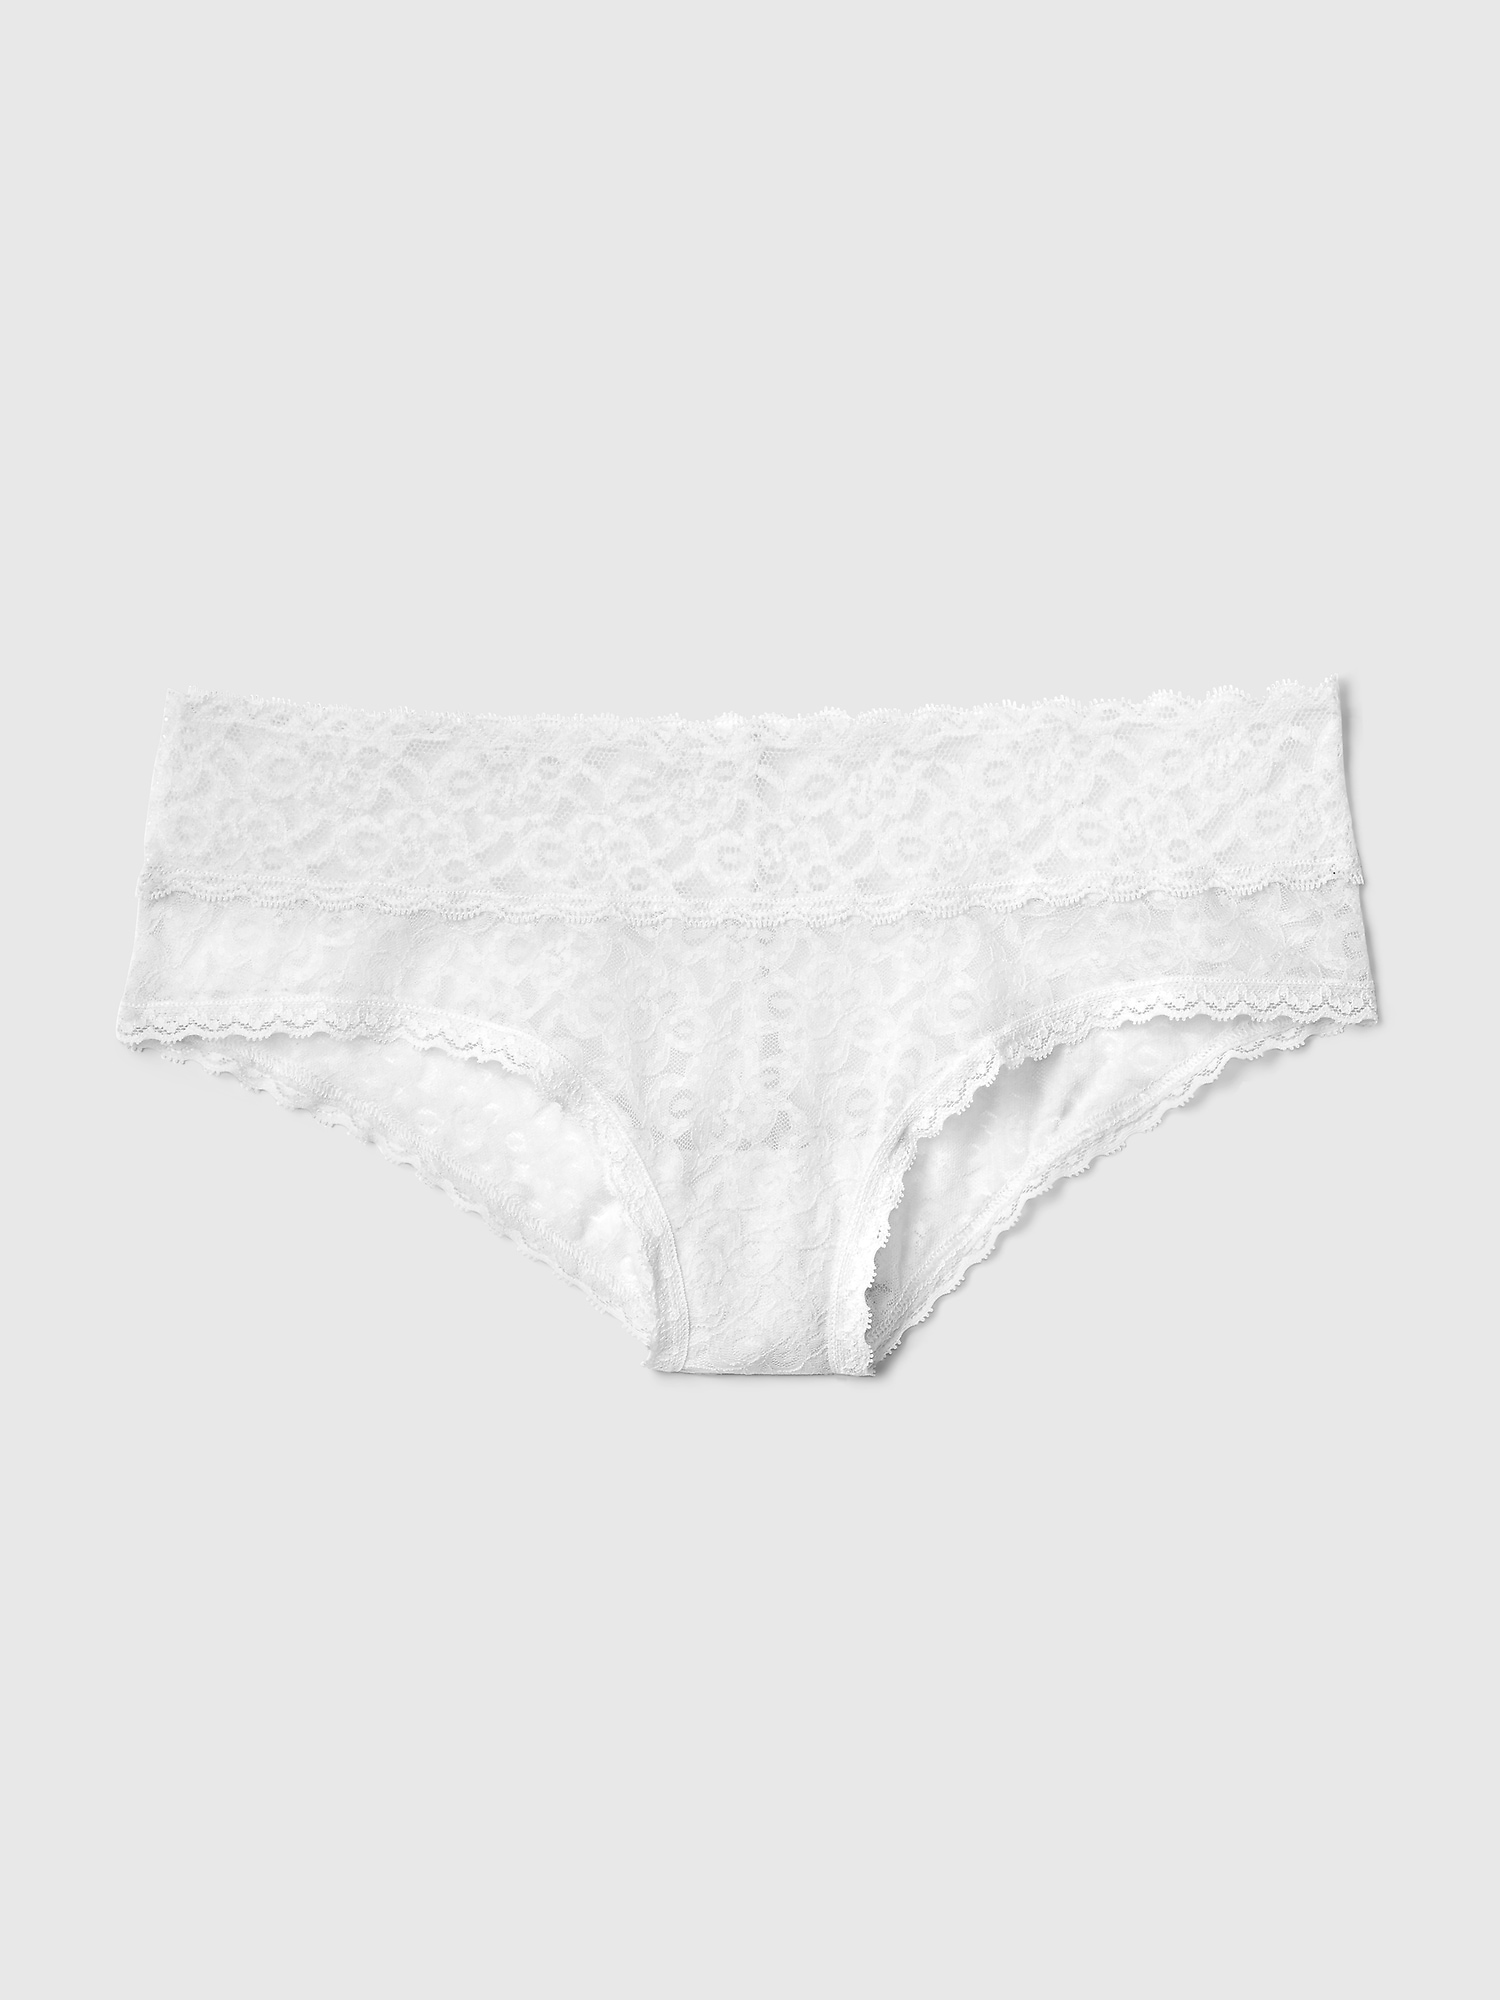 Unisex SIDE SLASHED Panty LACE Naughty SO LOW Cheeky His Hers X LARGE SH15